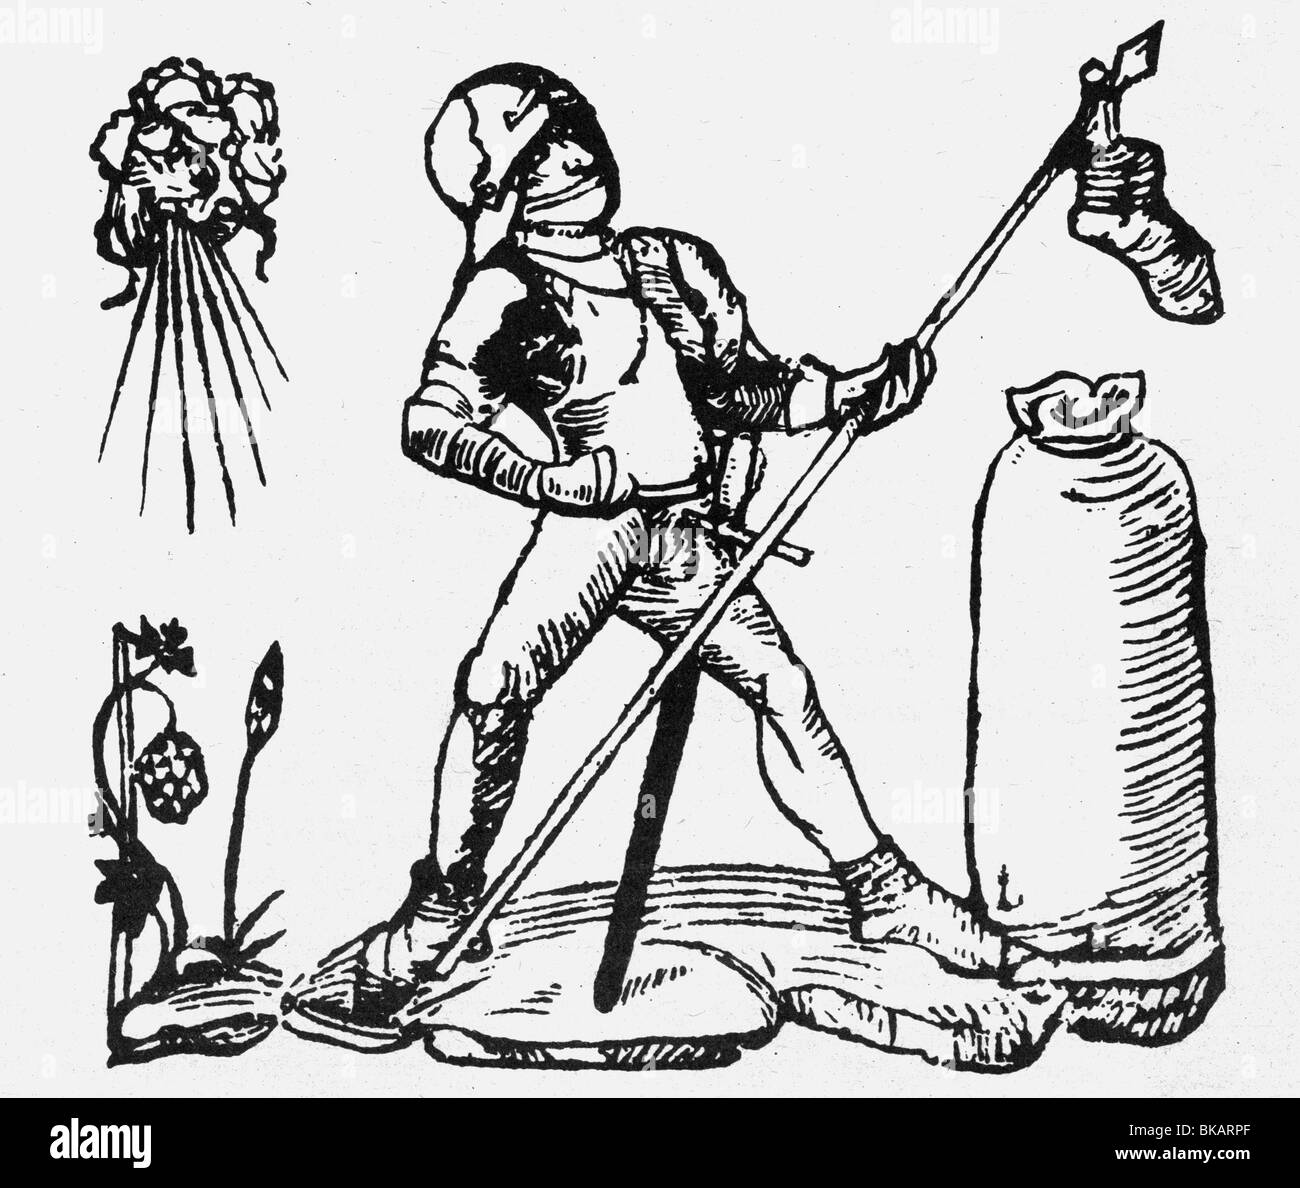 military, knights, knight with a tied shoe on his lance, woodcut, 1490, Bundschuh movement 1493-1519, conspiracy, plot, peasant's war, revolt, uprising, spear, armour, symbol, oppression, bag, Middle Ages, injustice, 15th century, historic, historical, Germany, medieval, people, Stock Photo